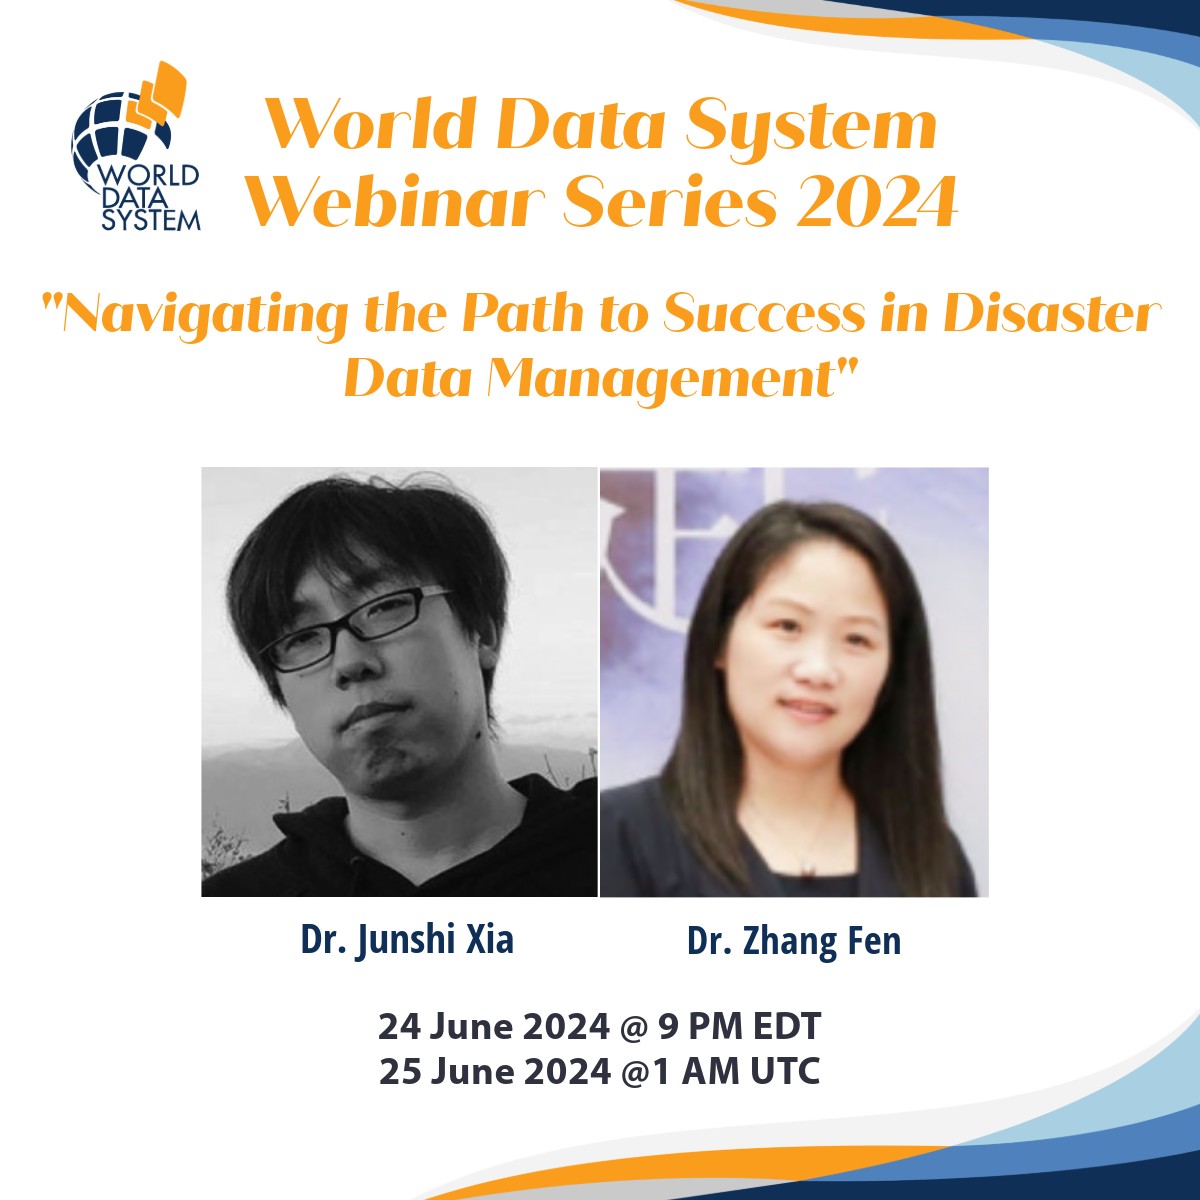 🌐Webinar Announcement: The WDS Webinar Series continues with“Navigating the Path to Success in Disaster Data Management”. Professors Junshi Xia and Zhang Feng will present on 24/25 June at 9 PM EDT/ 1 AM UTC. Sign up here ➡️ worlddatasystem.org/webinars/